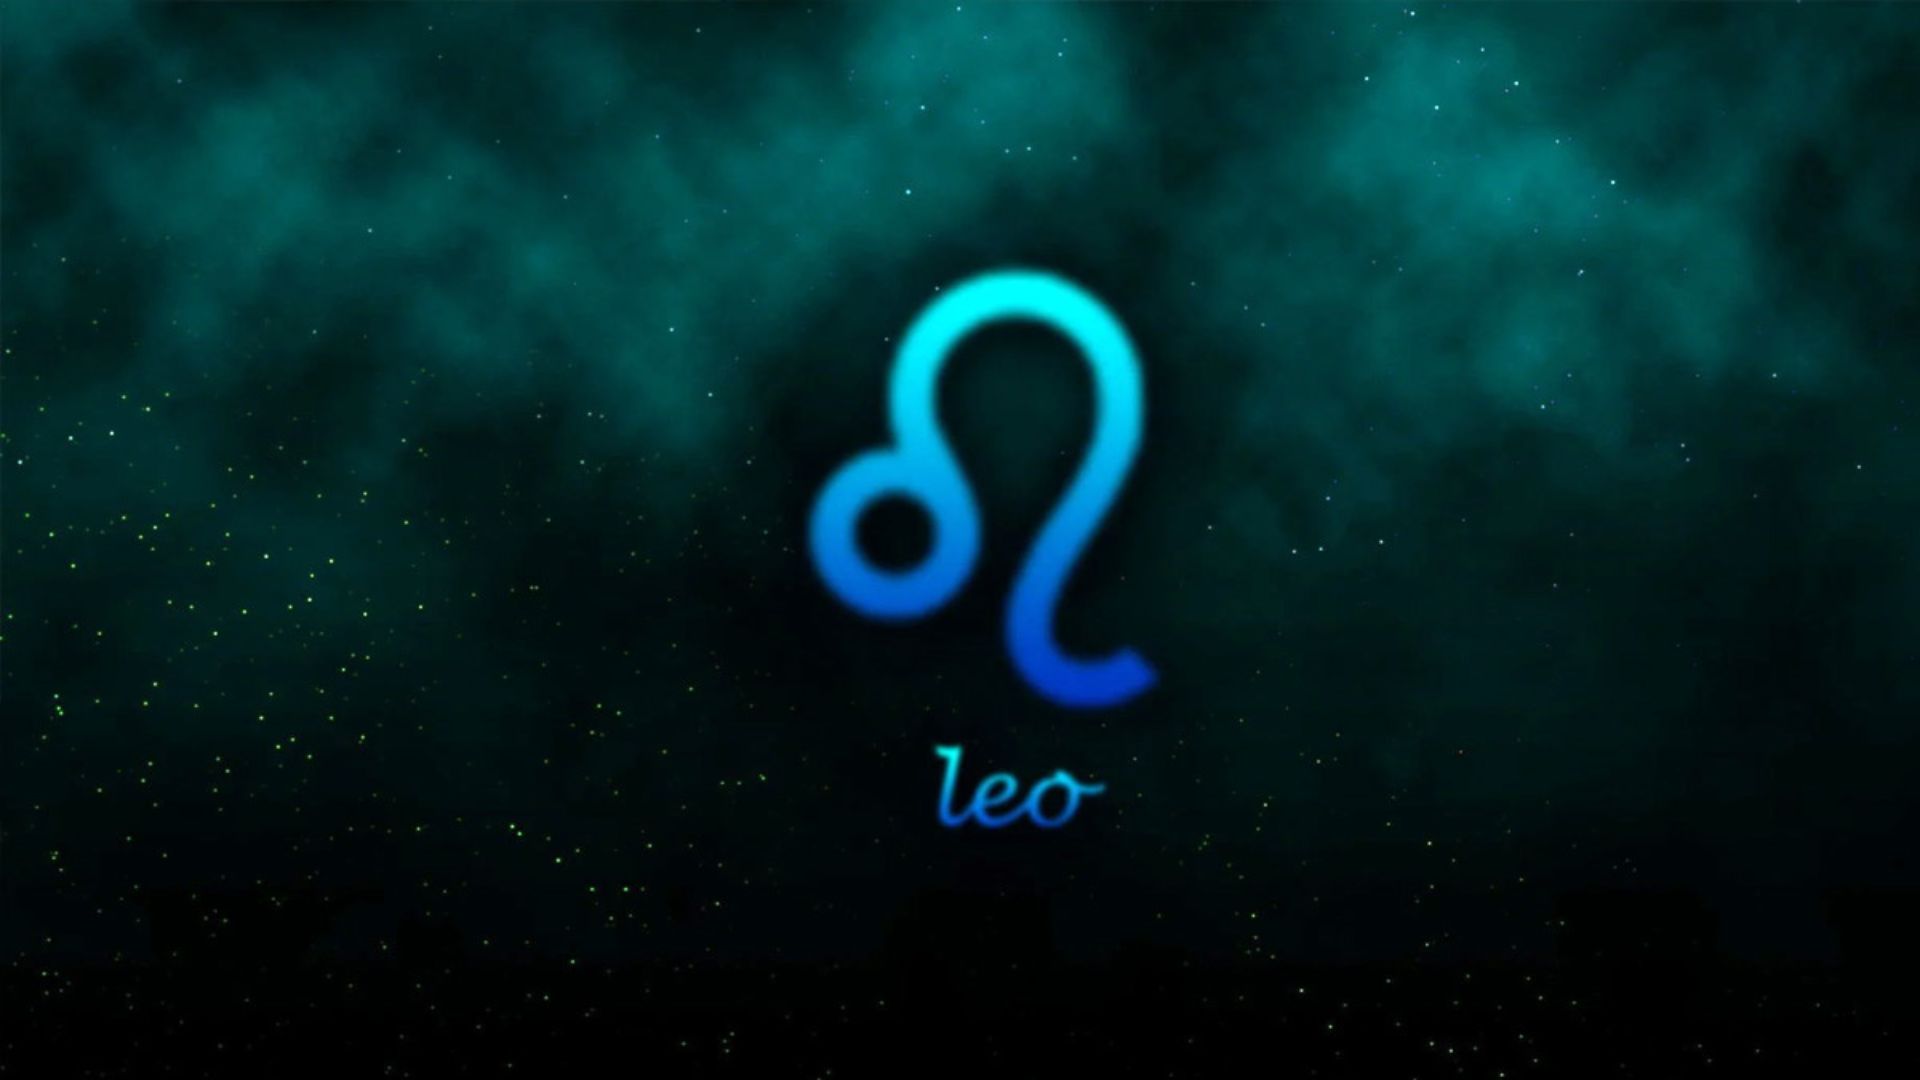 Leo Zodiac Sign And Stars In Background